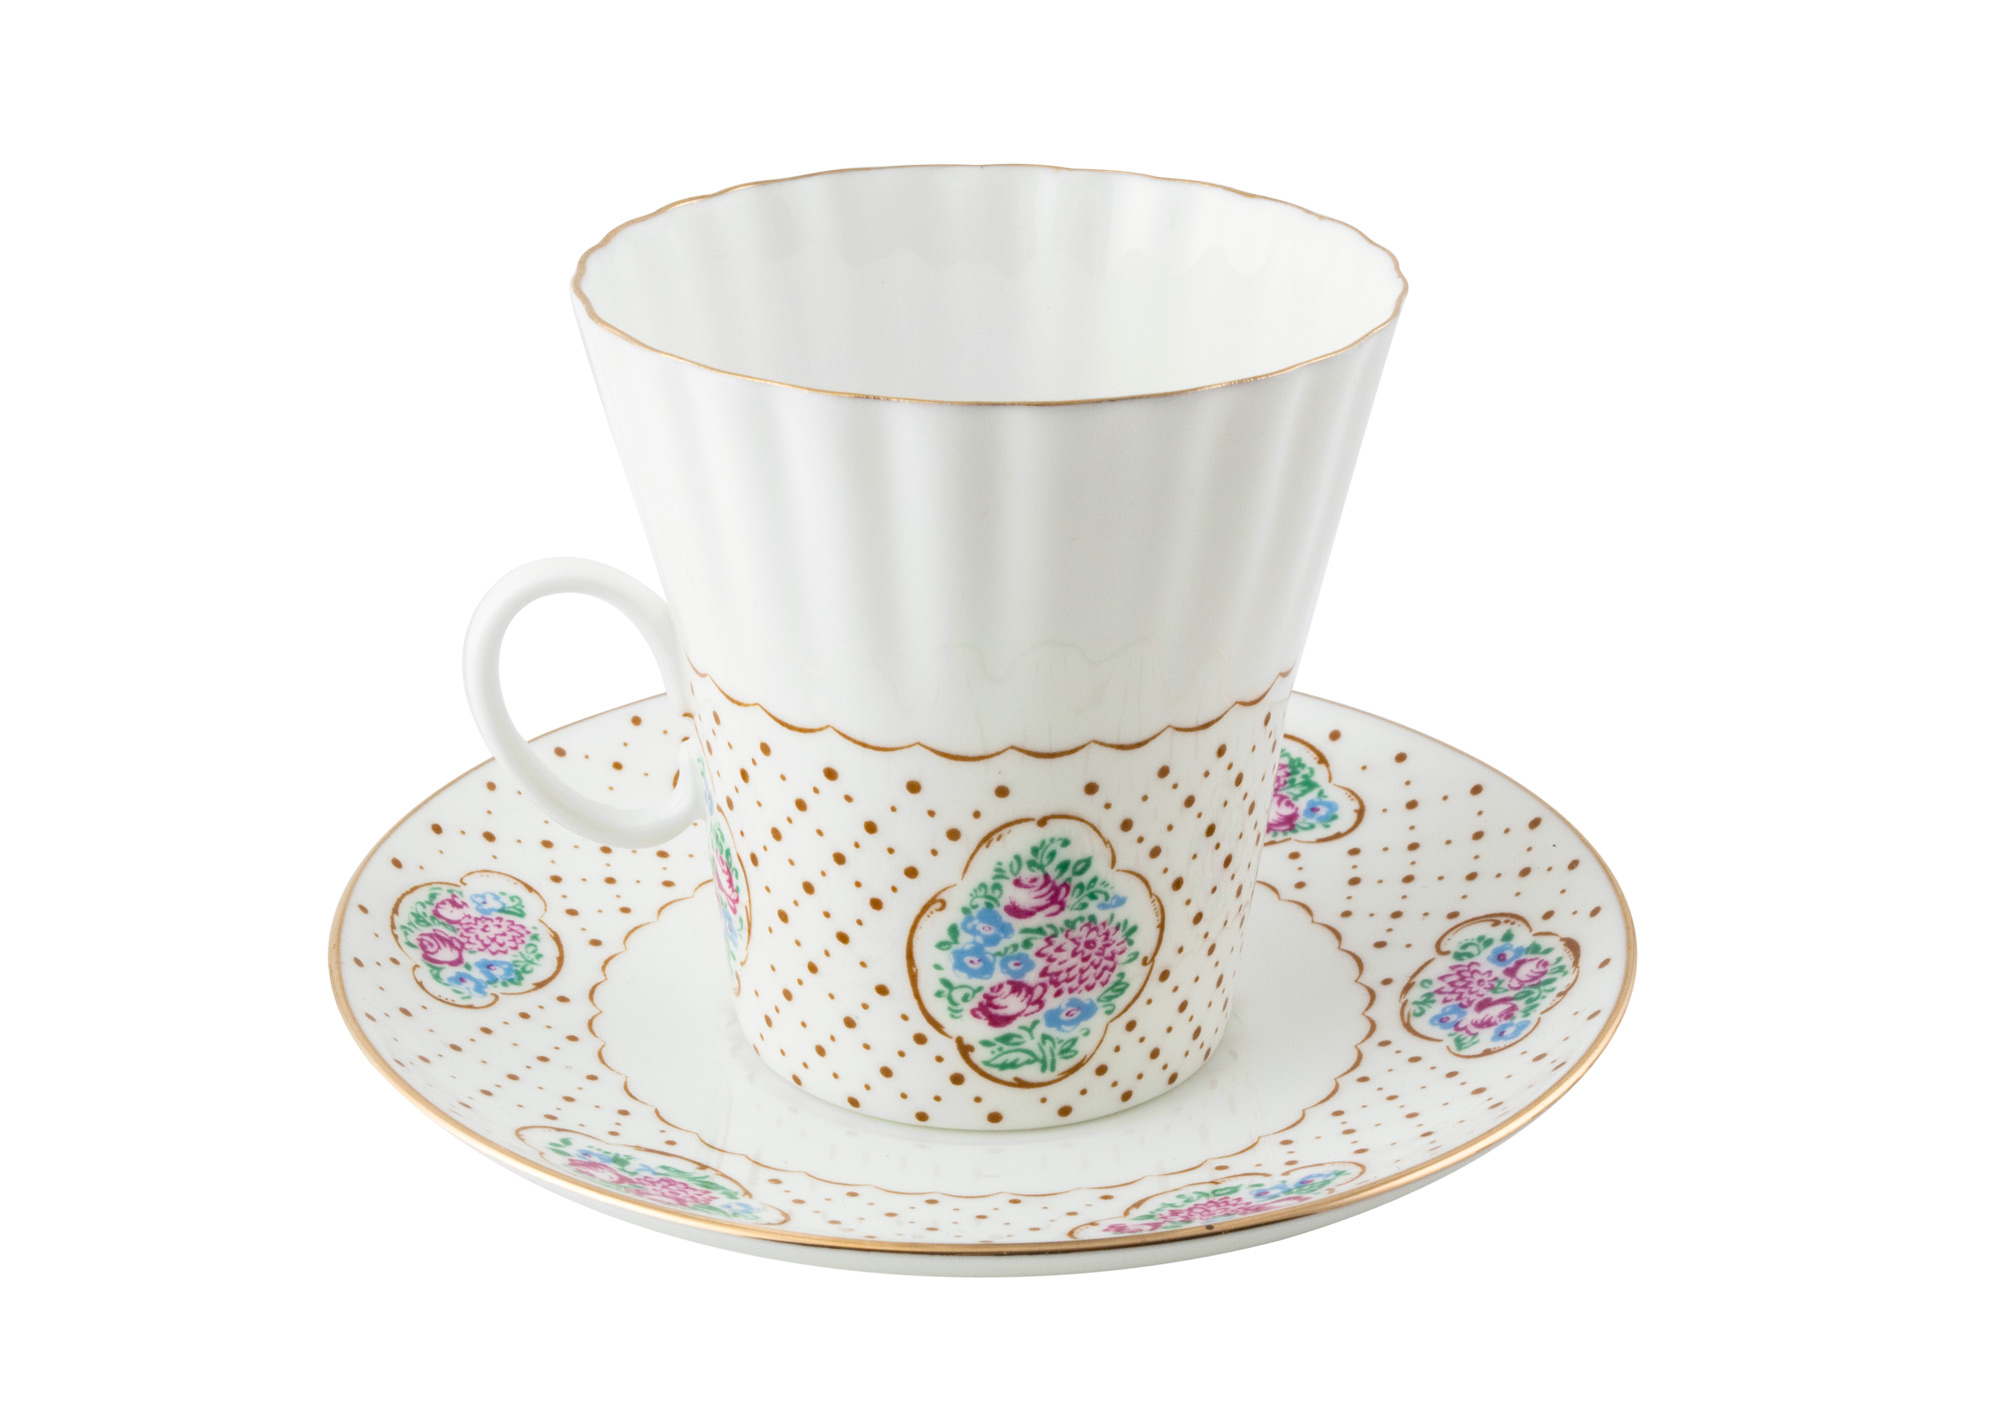 Buy Roses in Medallion B/C cup and saucer at GoldenCockerel.com